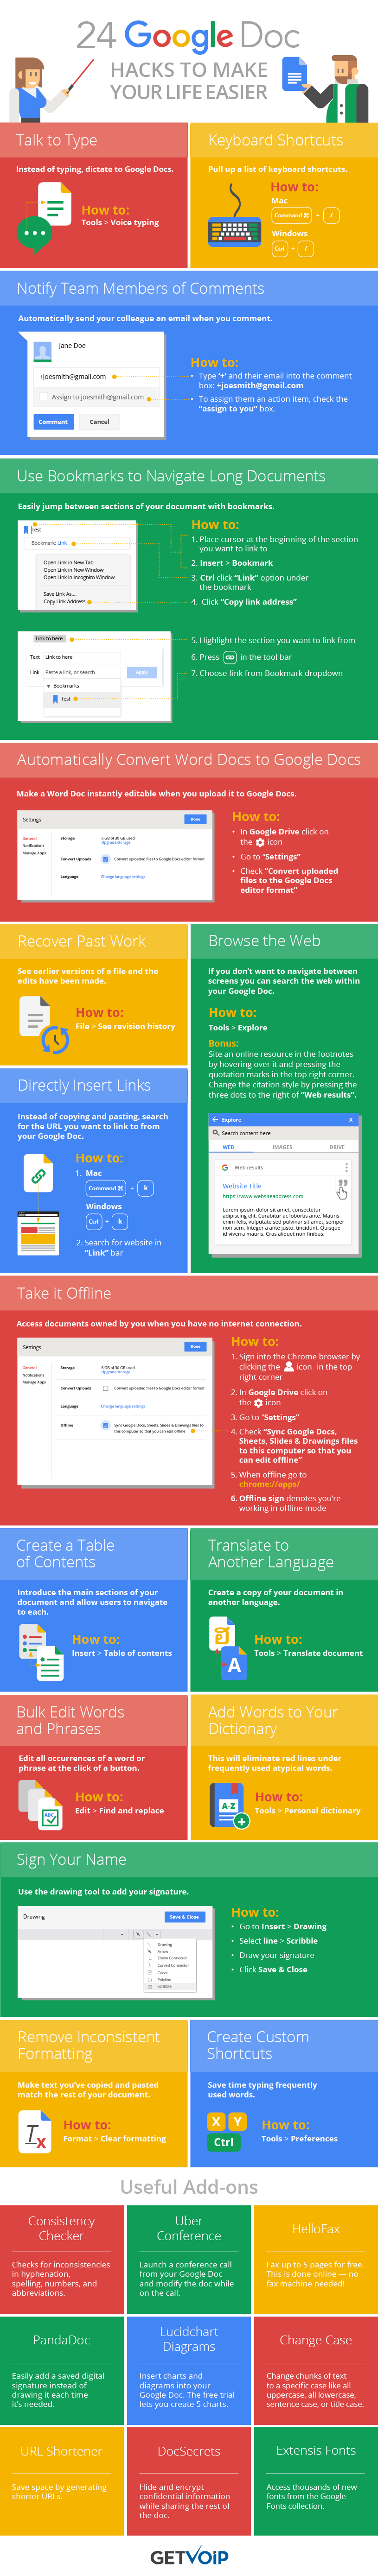 24 Google Doc Hacks and Add-ons to Make Your Life Easier [Infographic]